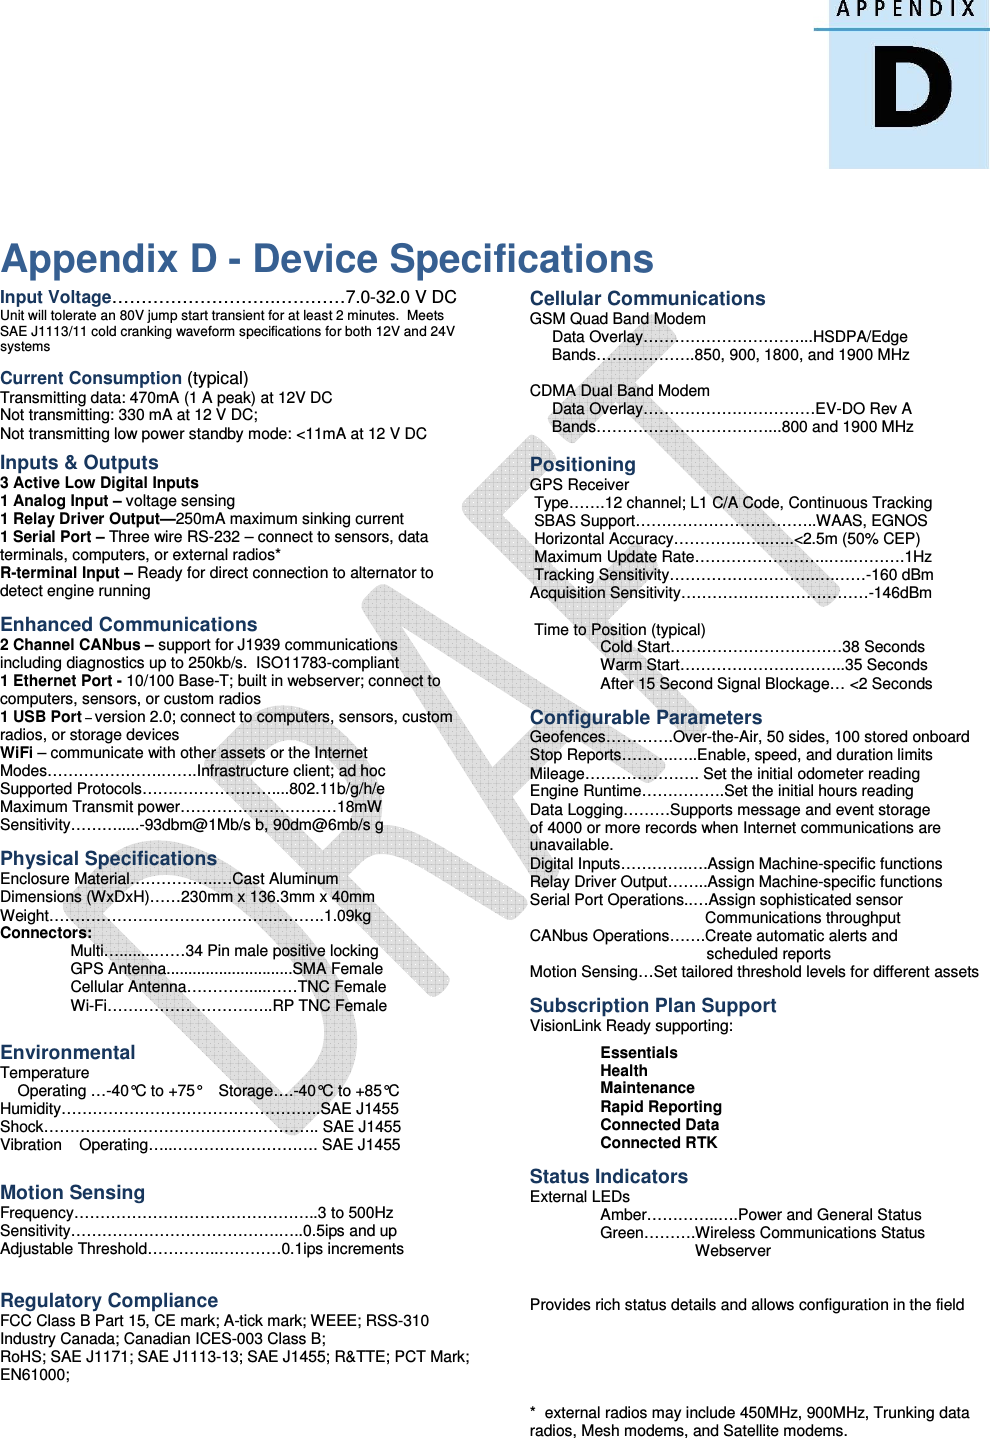   Appendix D - Device Specifications Input Voltage……………………….…………7.0-32.0 V DC Unit will tolerate an 80V jump start transient for at least 2 minutes.  Meets SAE J1113/11 cold cranking waveform specifications for both 12V and 24V systems  Current Consumption (typical) Transmitting data: 470mA (1 A peak) at 12V DC Not transmitting: 330 mA at 12 V DC; Not transmitting low power standby mode: &lt;11mA at 12 V DC  Inputs &amp; Outputs 3 Active Low Digital Inputs 1 Analog Input – voltage sensing 1 Relay Driver Output—250mA maximum sinking current 1 Serial Port – Three wire RS-232 – connect to sensors, data terminals, computers, or external radios* R-terminal Input – Ready for direct connection to alternator to detect engine running  Enhanced Communications 2 Channel CANbus – support for J1939 communications including diagnostics up to 250kb/s.  ISO11783-compliant 1 Ethernet Port - 10/100 Base-T; built in webserver; connect to computers, sensors, or custom radios 1 USB Port – version 2.0; connect to computers, sensors, custom radios, or storage devices WiFi – communicate with other assets or the Internet Modes………………….…….Infrastructure client; ad hoc Supported Protocols…….………………....802.11b/g/h/e Maximum Transmit power…………………………18mW  Sensitivity……….....-93dbm@1Mb/s b, 90dm@6mb/s g  Physical Specifications Enclosure Material……………..…Cast Aluminum Dimensions (WxDxH)……230mm x 136.3mm x 40mm  Weight…………………………………….……….1.09kg Connectors:   Multi…........……34 Pin male positive locking   GPS Antenna.............................SMA Female   Cellular Antenna…………....……TNC Female   Wi-Fi…………………………..RP TNC Female   Environmental Temperature     Operating …-40°C to +75°    Storage….-40°C to +85°C Humidity…………………………………………..SAE J1455 Shock…………………………………………….. SAE J1455  Vibration    Operating…..………………………. SAE J1455   Motion Sensing Frequency………………………………………..3 to 500Hz Sensitivity………………………………….…..0.5ips and up Adjustable Threshold…………..…………0.1ips increments     Regulatory Compliance FCC Class B Part 15, CE mark; A-tick mark; WEEE; RSS-310 Industry Canada; Canadian ICES-003 Class B;  RoHS; SAE J1171; SAE J1113-13; SAE J1455; R&amp;TTE; PCT Mark; EN61000;         Cellular Communications GSM Quad Band Modem      Data Overlay…………………………...HSDPA/Edge      Bands……………….850, 900, 1800, and 1900 MHz  CDMA Dual Band Modem      Data Overlay……………………………EV-DO Rev A      Bands……………………………...800 and 1900 MHz       Positioning GPS Receiver  Type…….12 channel; L1 C/A Code, Continuous Tracking  SBAS Support……………………………..WAAS, EGNOS  Horizontal Accuracy………….…...…..&lt;2.5m (50% CEP)  Maximum Update Rate……………………..…..……….1Hz  Tracking Sensitivity……………………….….……-160 dBm Acquisition Sensitivity………………………………-146dBm    Time to Position (typical)      Cold Start……………………………38 Seconds Warm Start…………………………..35 Seconds After 15 Second Signal Blockage… &lt;2 Seconds  Configurable Parameters Geofences………….Over-the-Air, 50 sides, 100 stored onboard Stop Reports……….…..Enable, speed, and duration limits Mileage…………………. Set the initial odometer reading Engine Runtime…………….Set the initial hours reading Data Logging………Supports message and event storage of 4000 or more records when Internet communications are unavailable. Digital Inputs………….….Assign Machine-specific functions Relay Driver Output……..Assign Machine-specific functions Serial Port Operations..…Assign sophisticated sensor                         Communications throughput CANbus Operations…….Create automatic alerts and     …………………………….scheduled reports Motion Sensing…Set tailored threshold levels for different assets  Subscription Plan Support VisionLink Ready supporting:  Essentials Health Maintenance Rapid Reporting Connected Data Connected RTK  Status Indicators External LEDs   Amber…………..….Power and General Status   Green……….Wireless Communications Status                                       Webserver   Provides rich status details and allows configuration in the field      *  external radios may include 450MHz, 900MHz, Trunking data  radios, Mesh modems, and Satellite modems.       